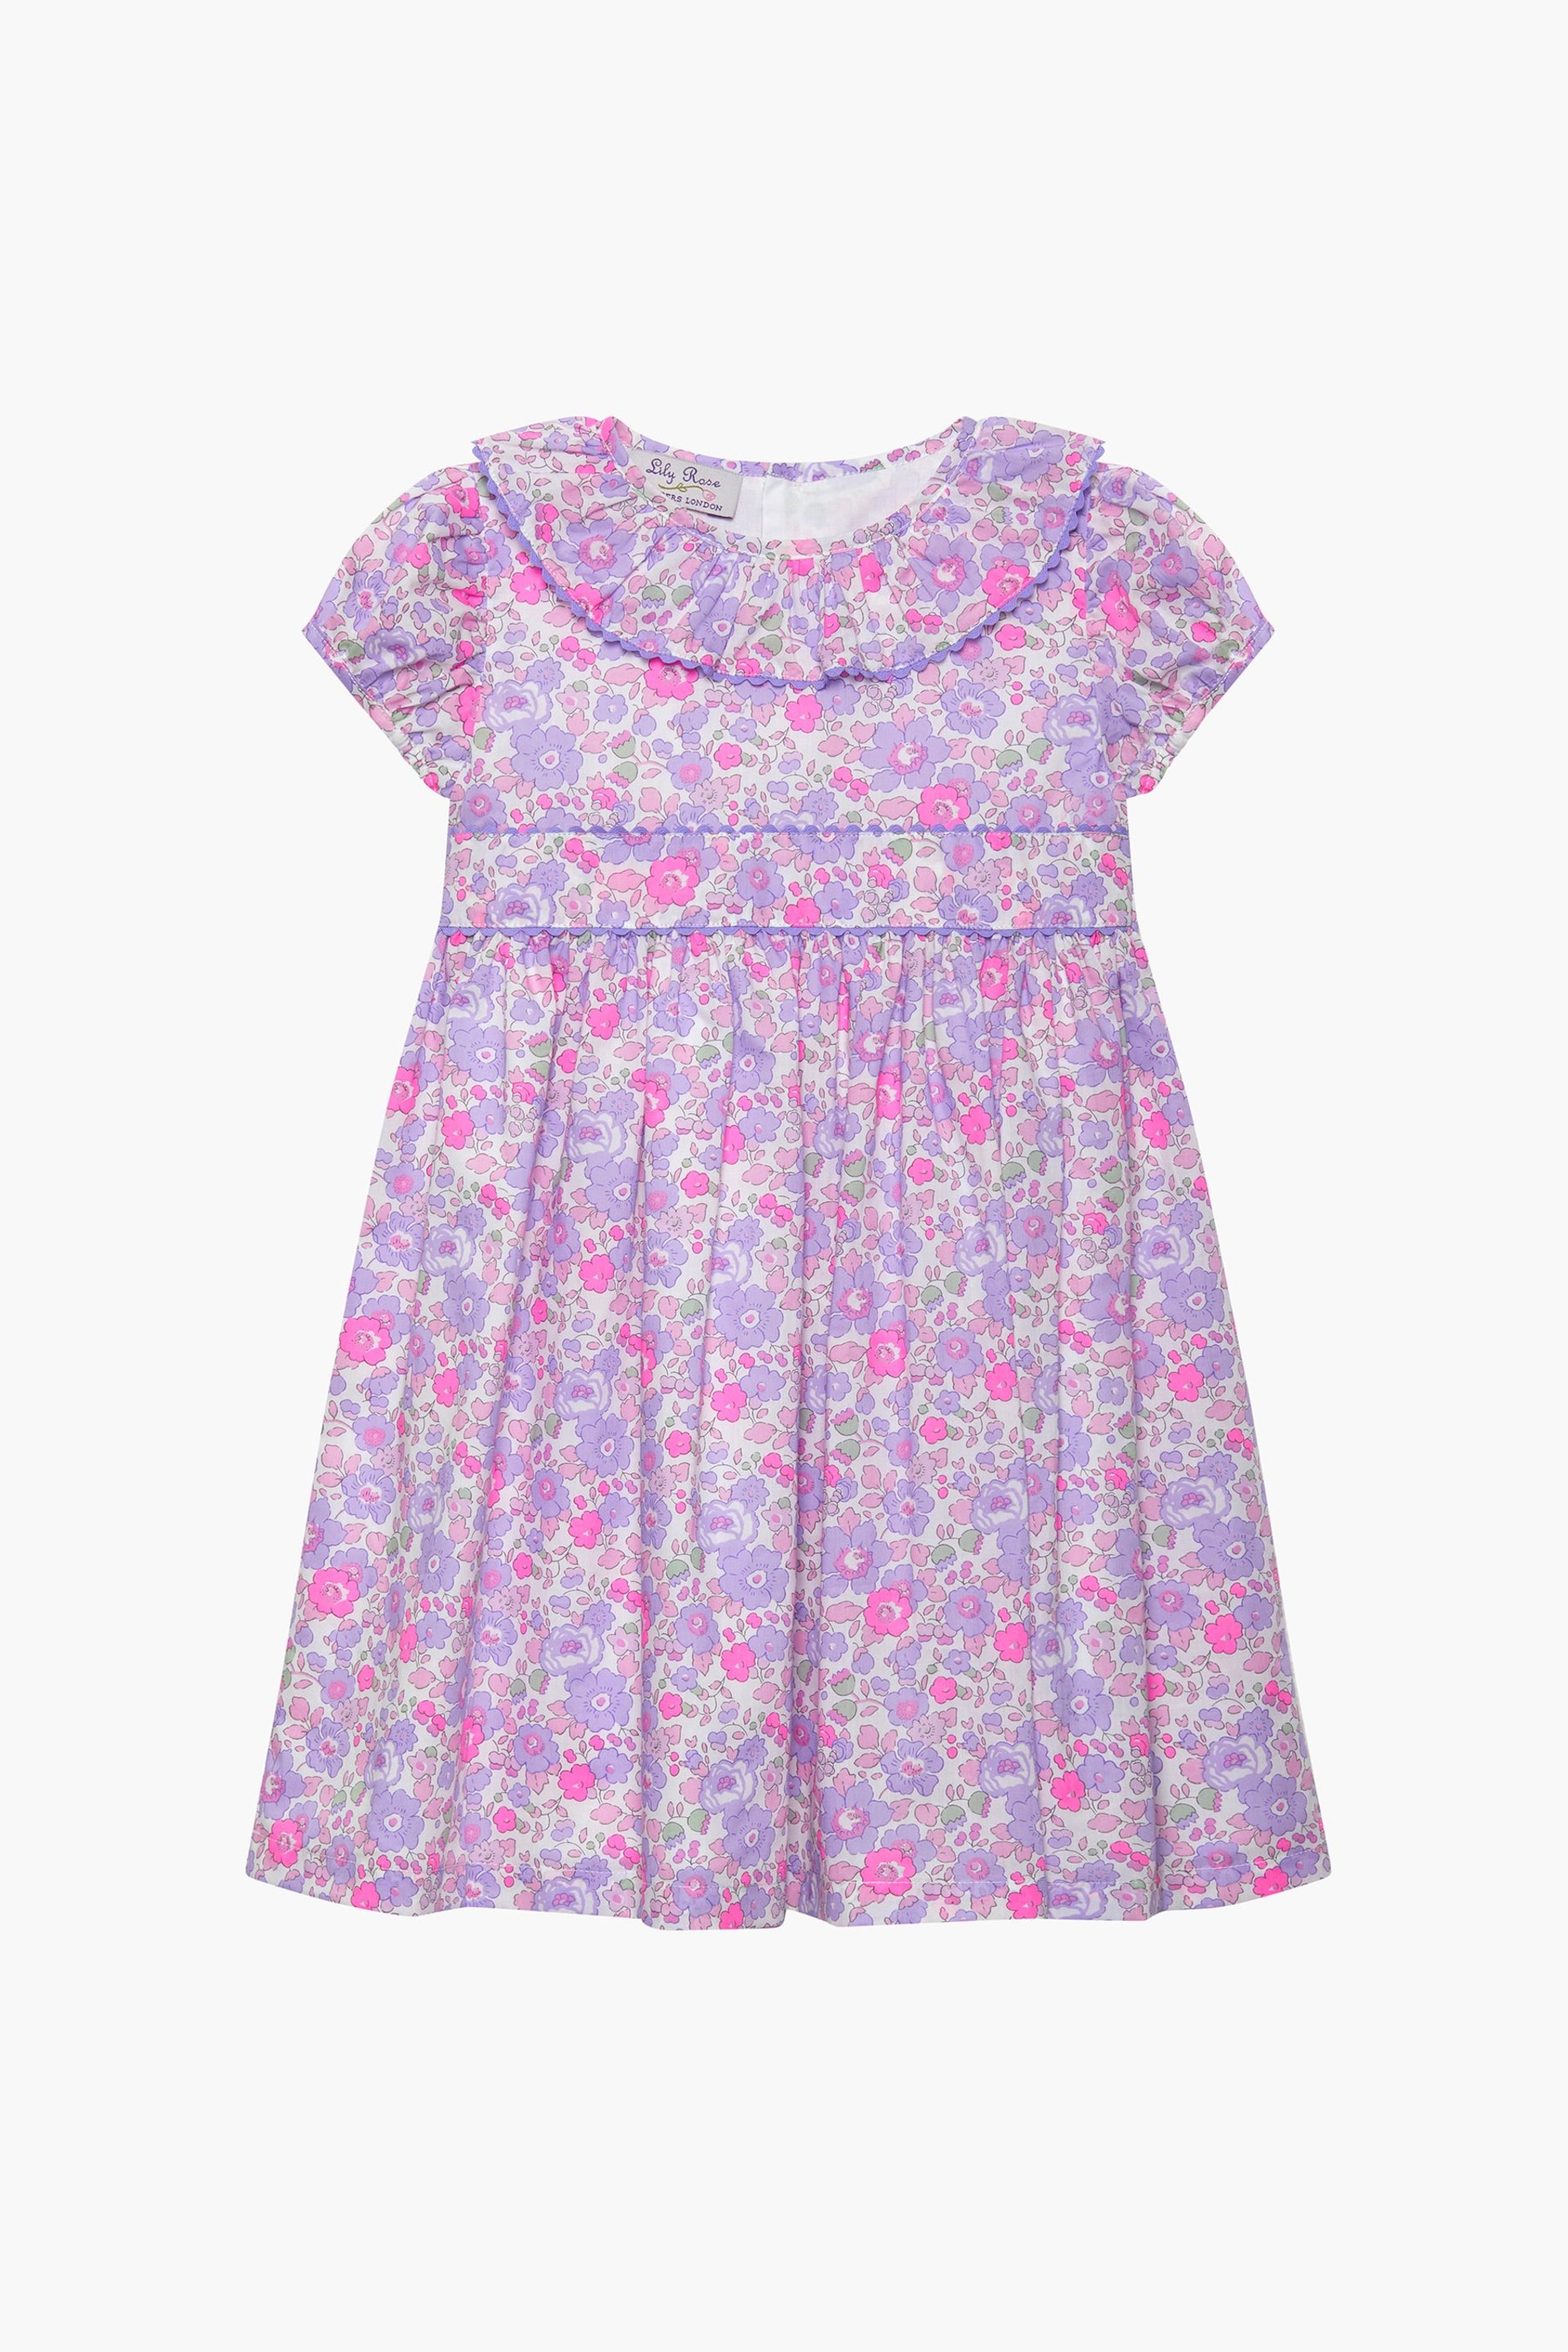 Trotters London Purple Liberty Print Betsy Ric Rac Cotton Party Dress - Image 4 of 6